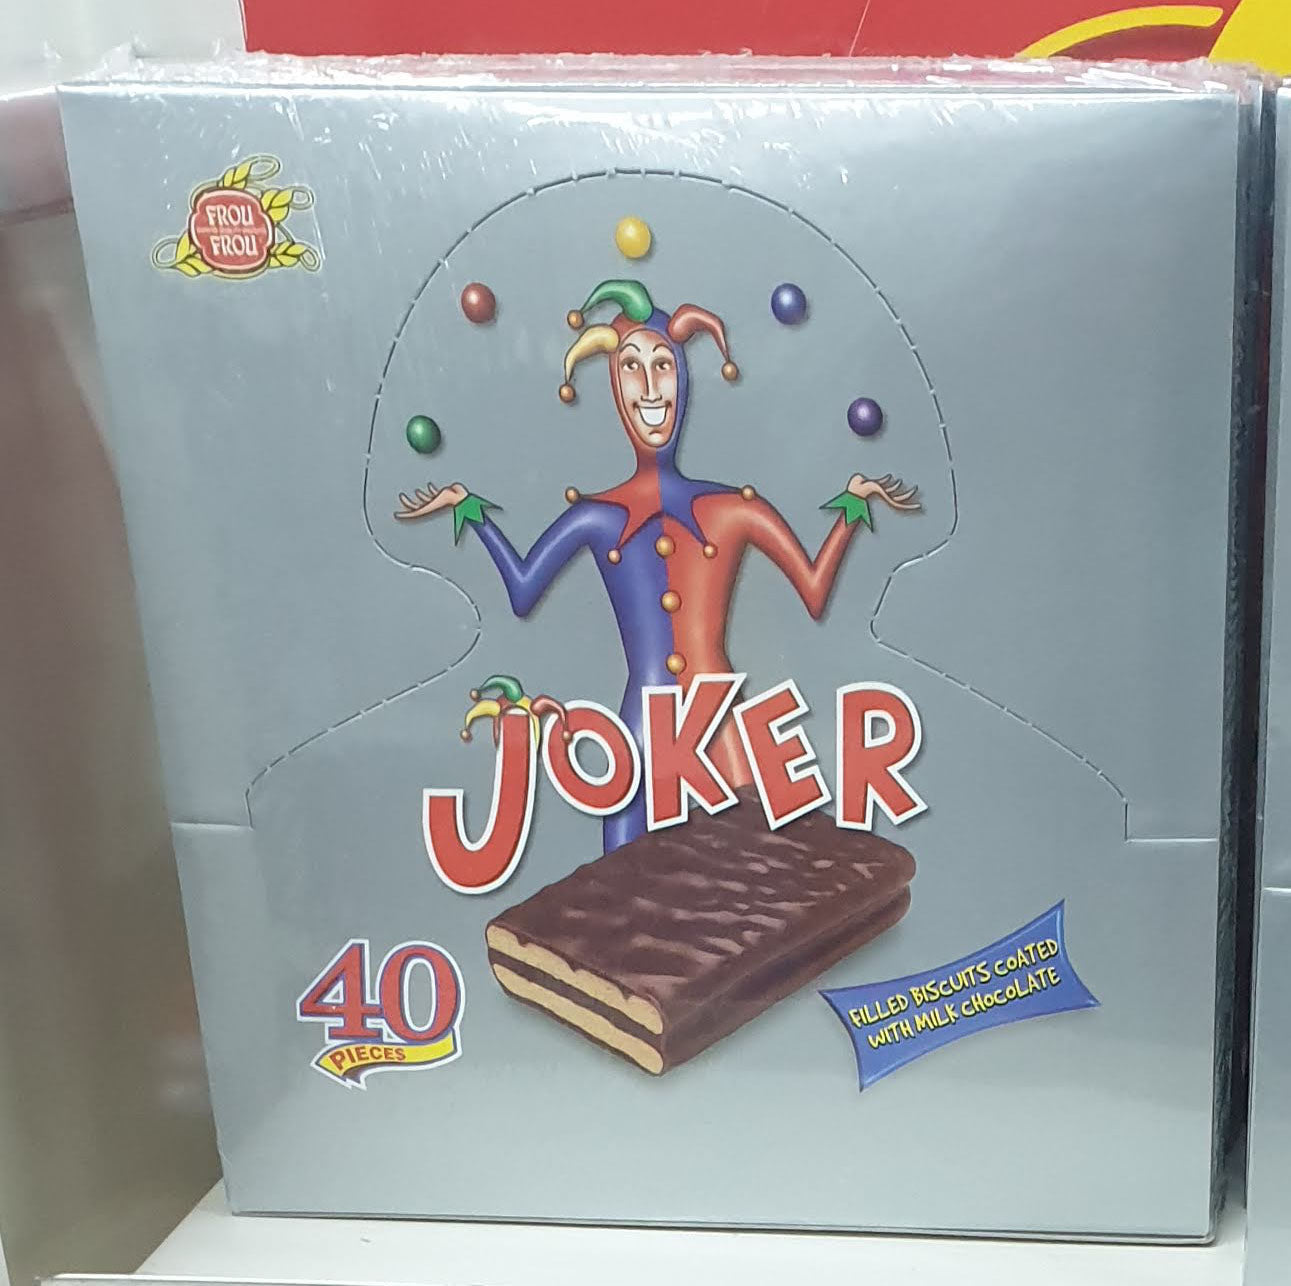 joker frou frou biscuits from cyprus